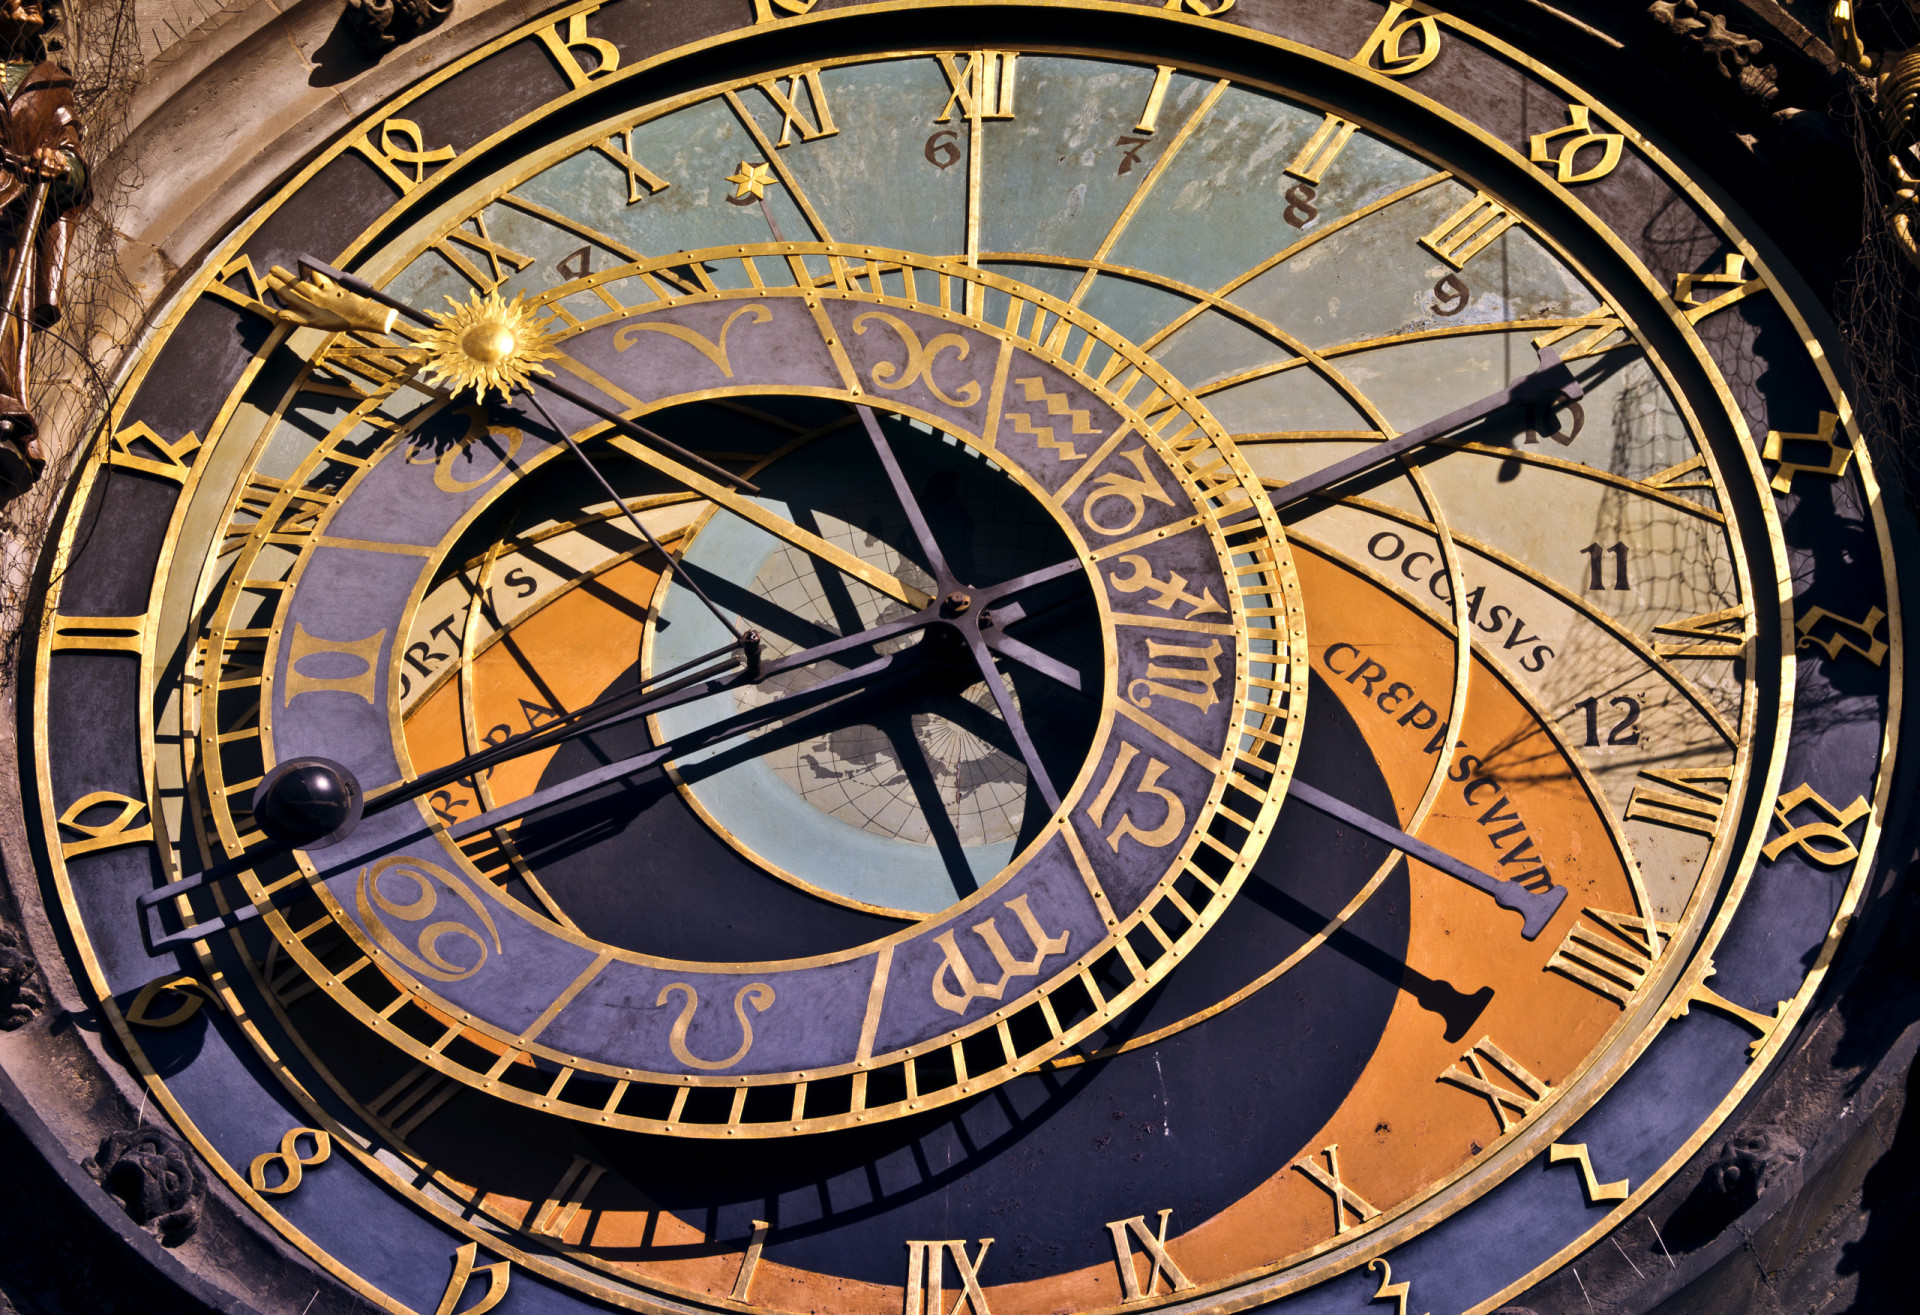 <p>It might surprise you to learn that exactly how time works is still a bit of a mystery to physicists. For now, travel into the future seems possible (as we hurtle toward it each day).</p>